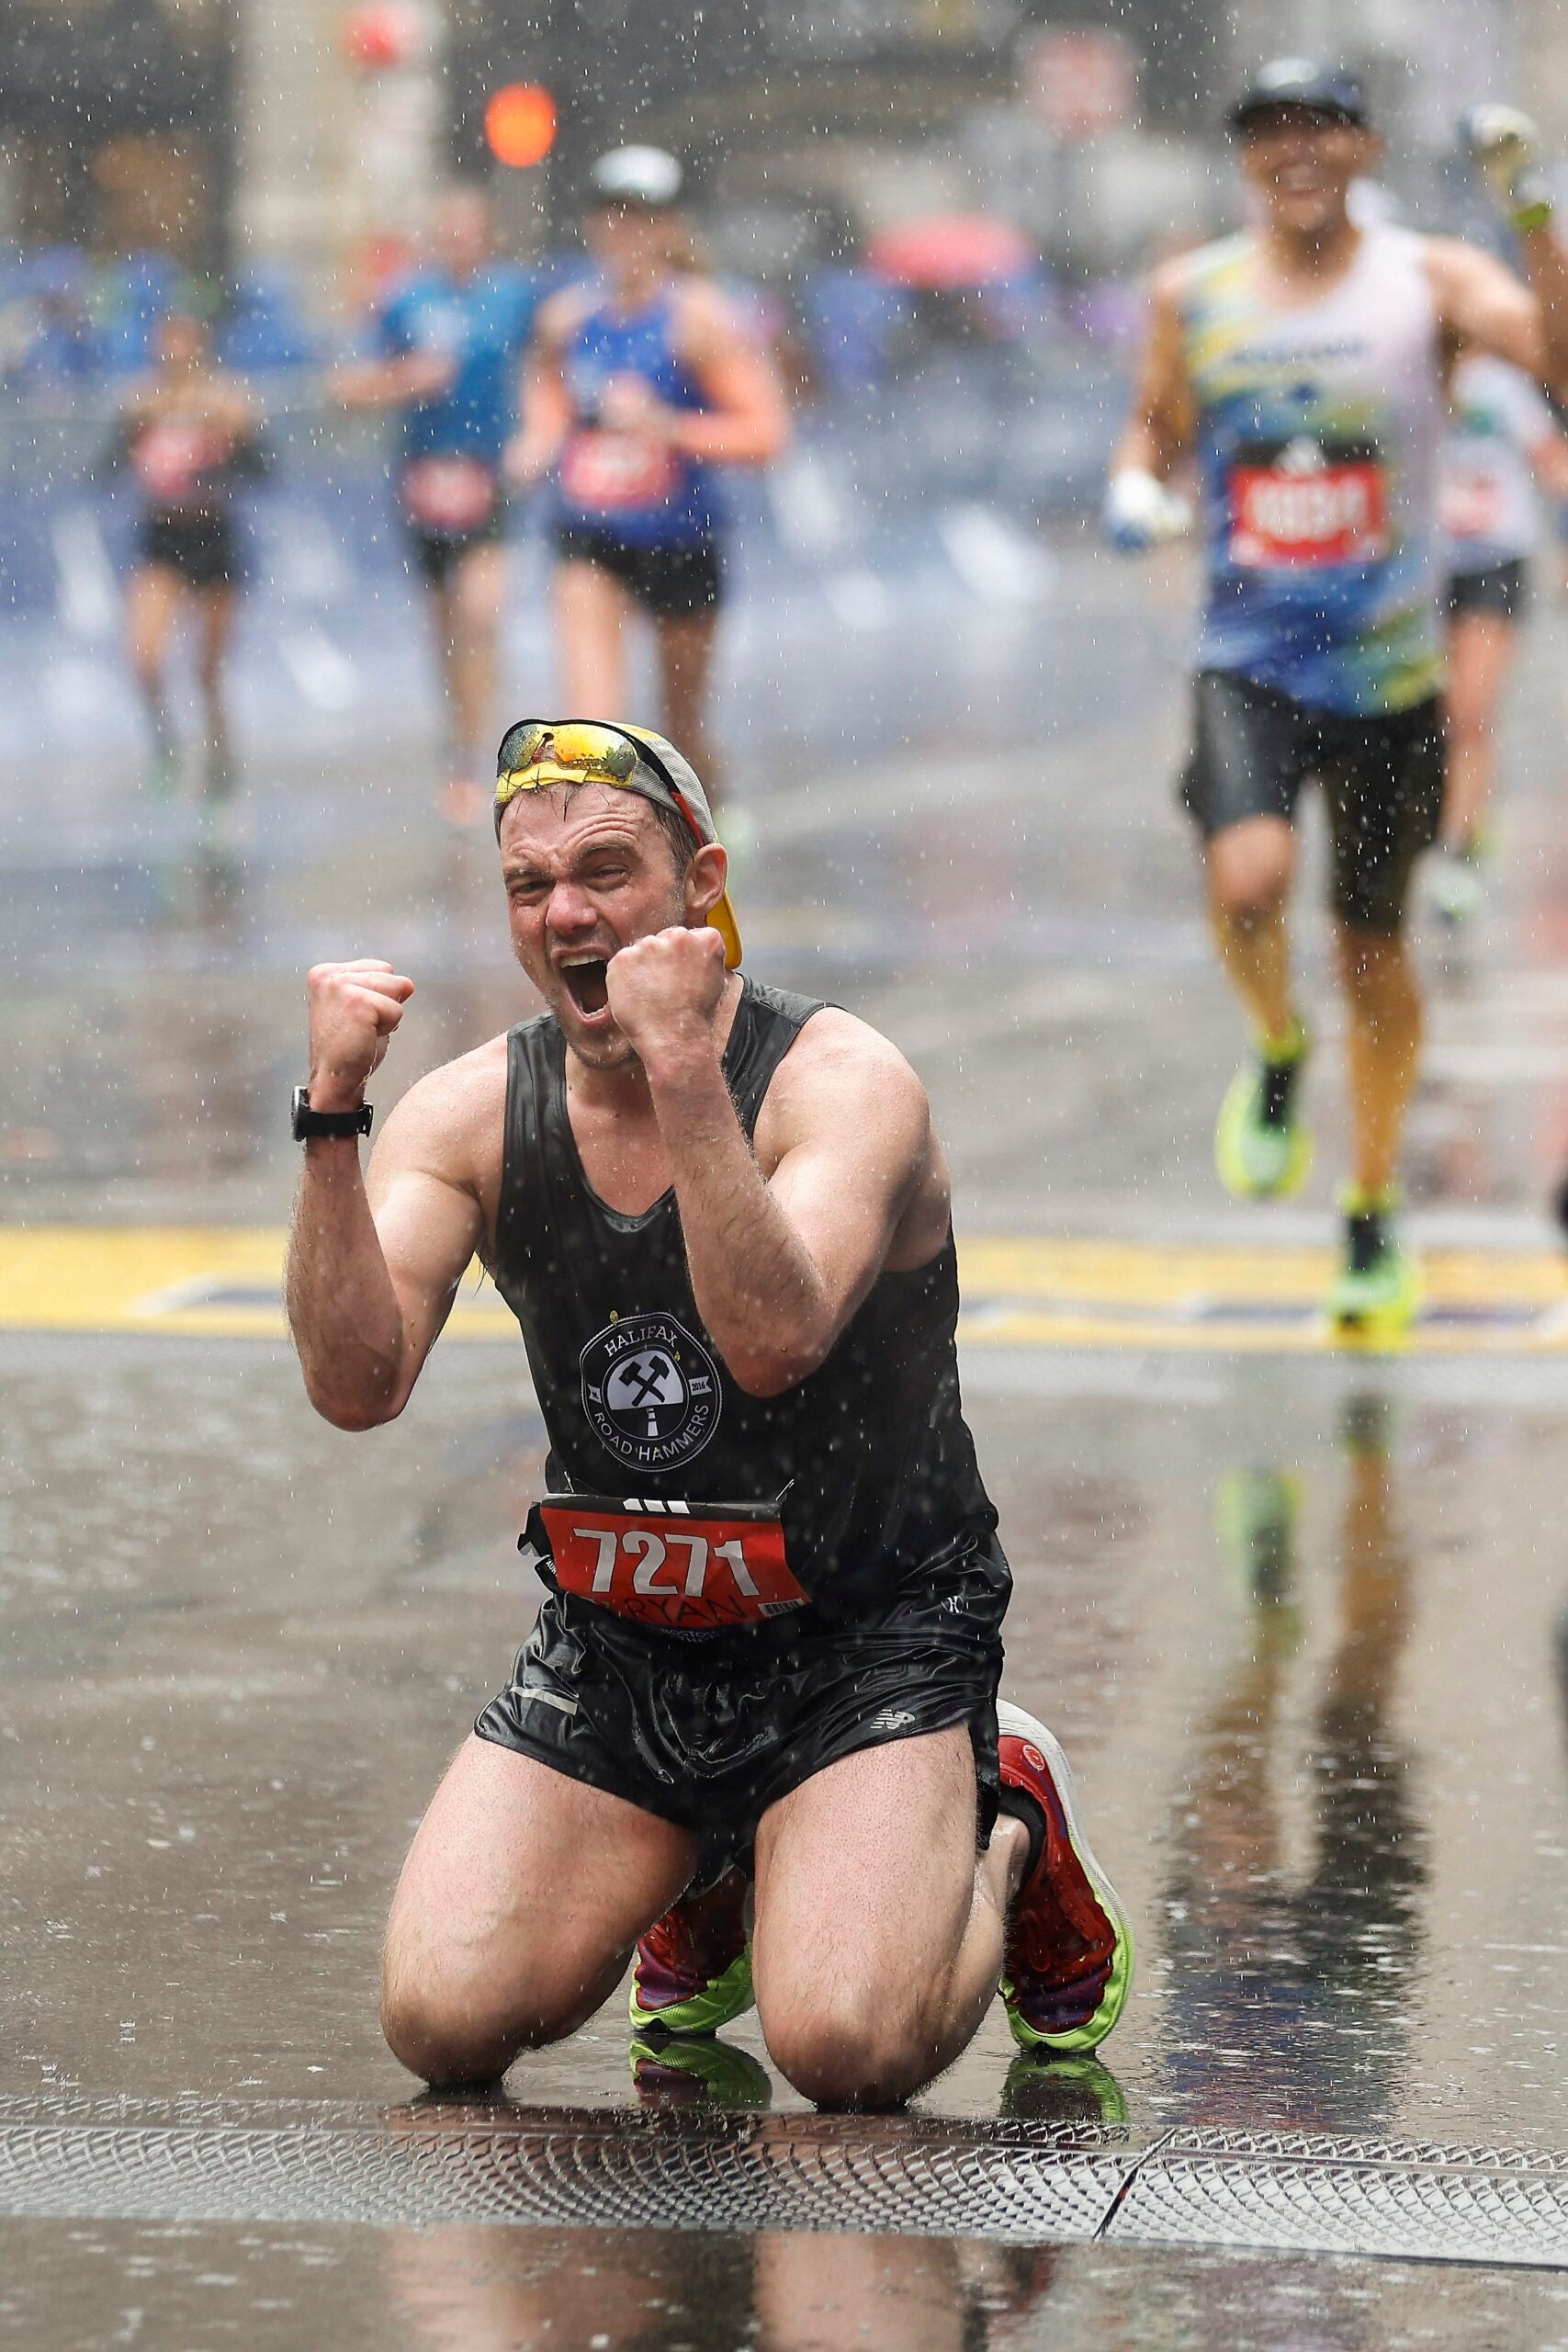 Ryan MacDonald of Canada celebrates on his knees after crossing the finish line of the 127th Boston Marathon Monday, April 17, 2023, in Boston.